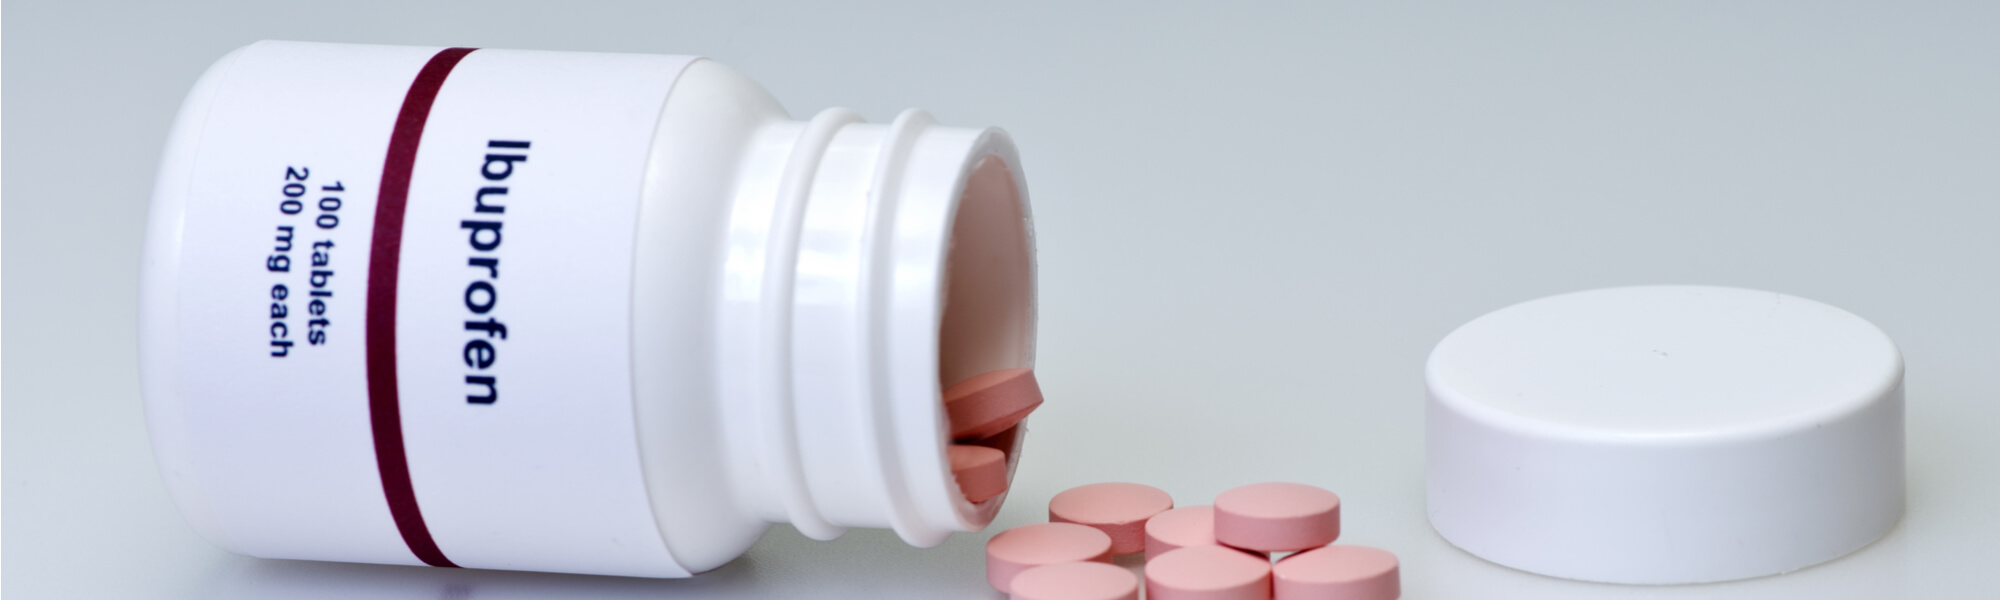 Does Ibuprofen Cause Constipation? The Unknown Side Effect